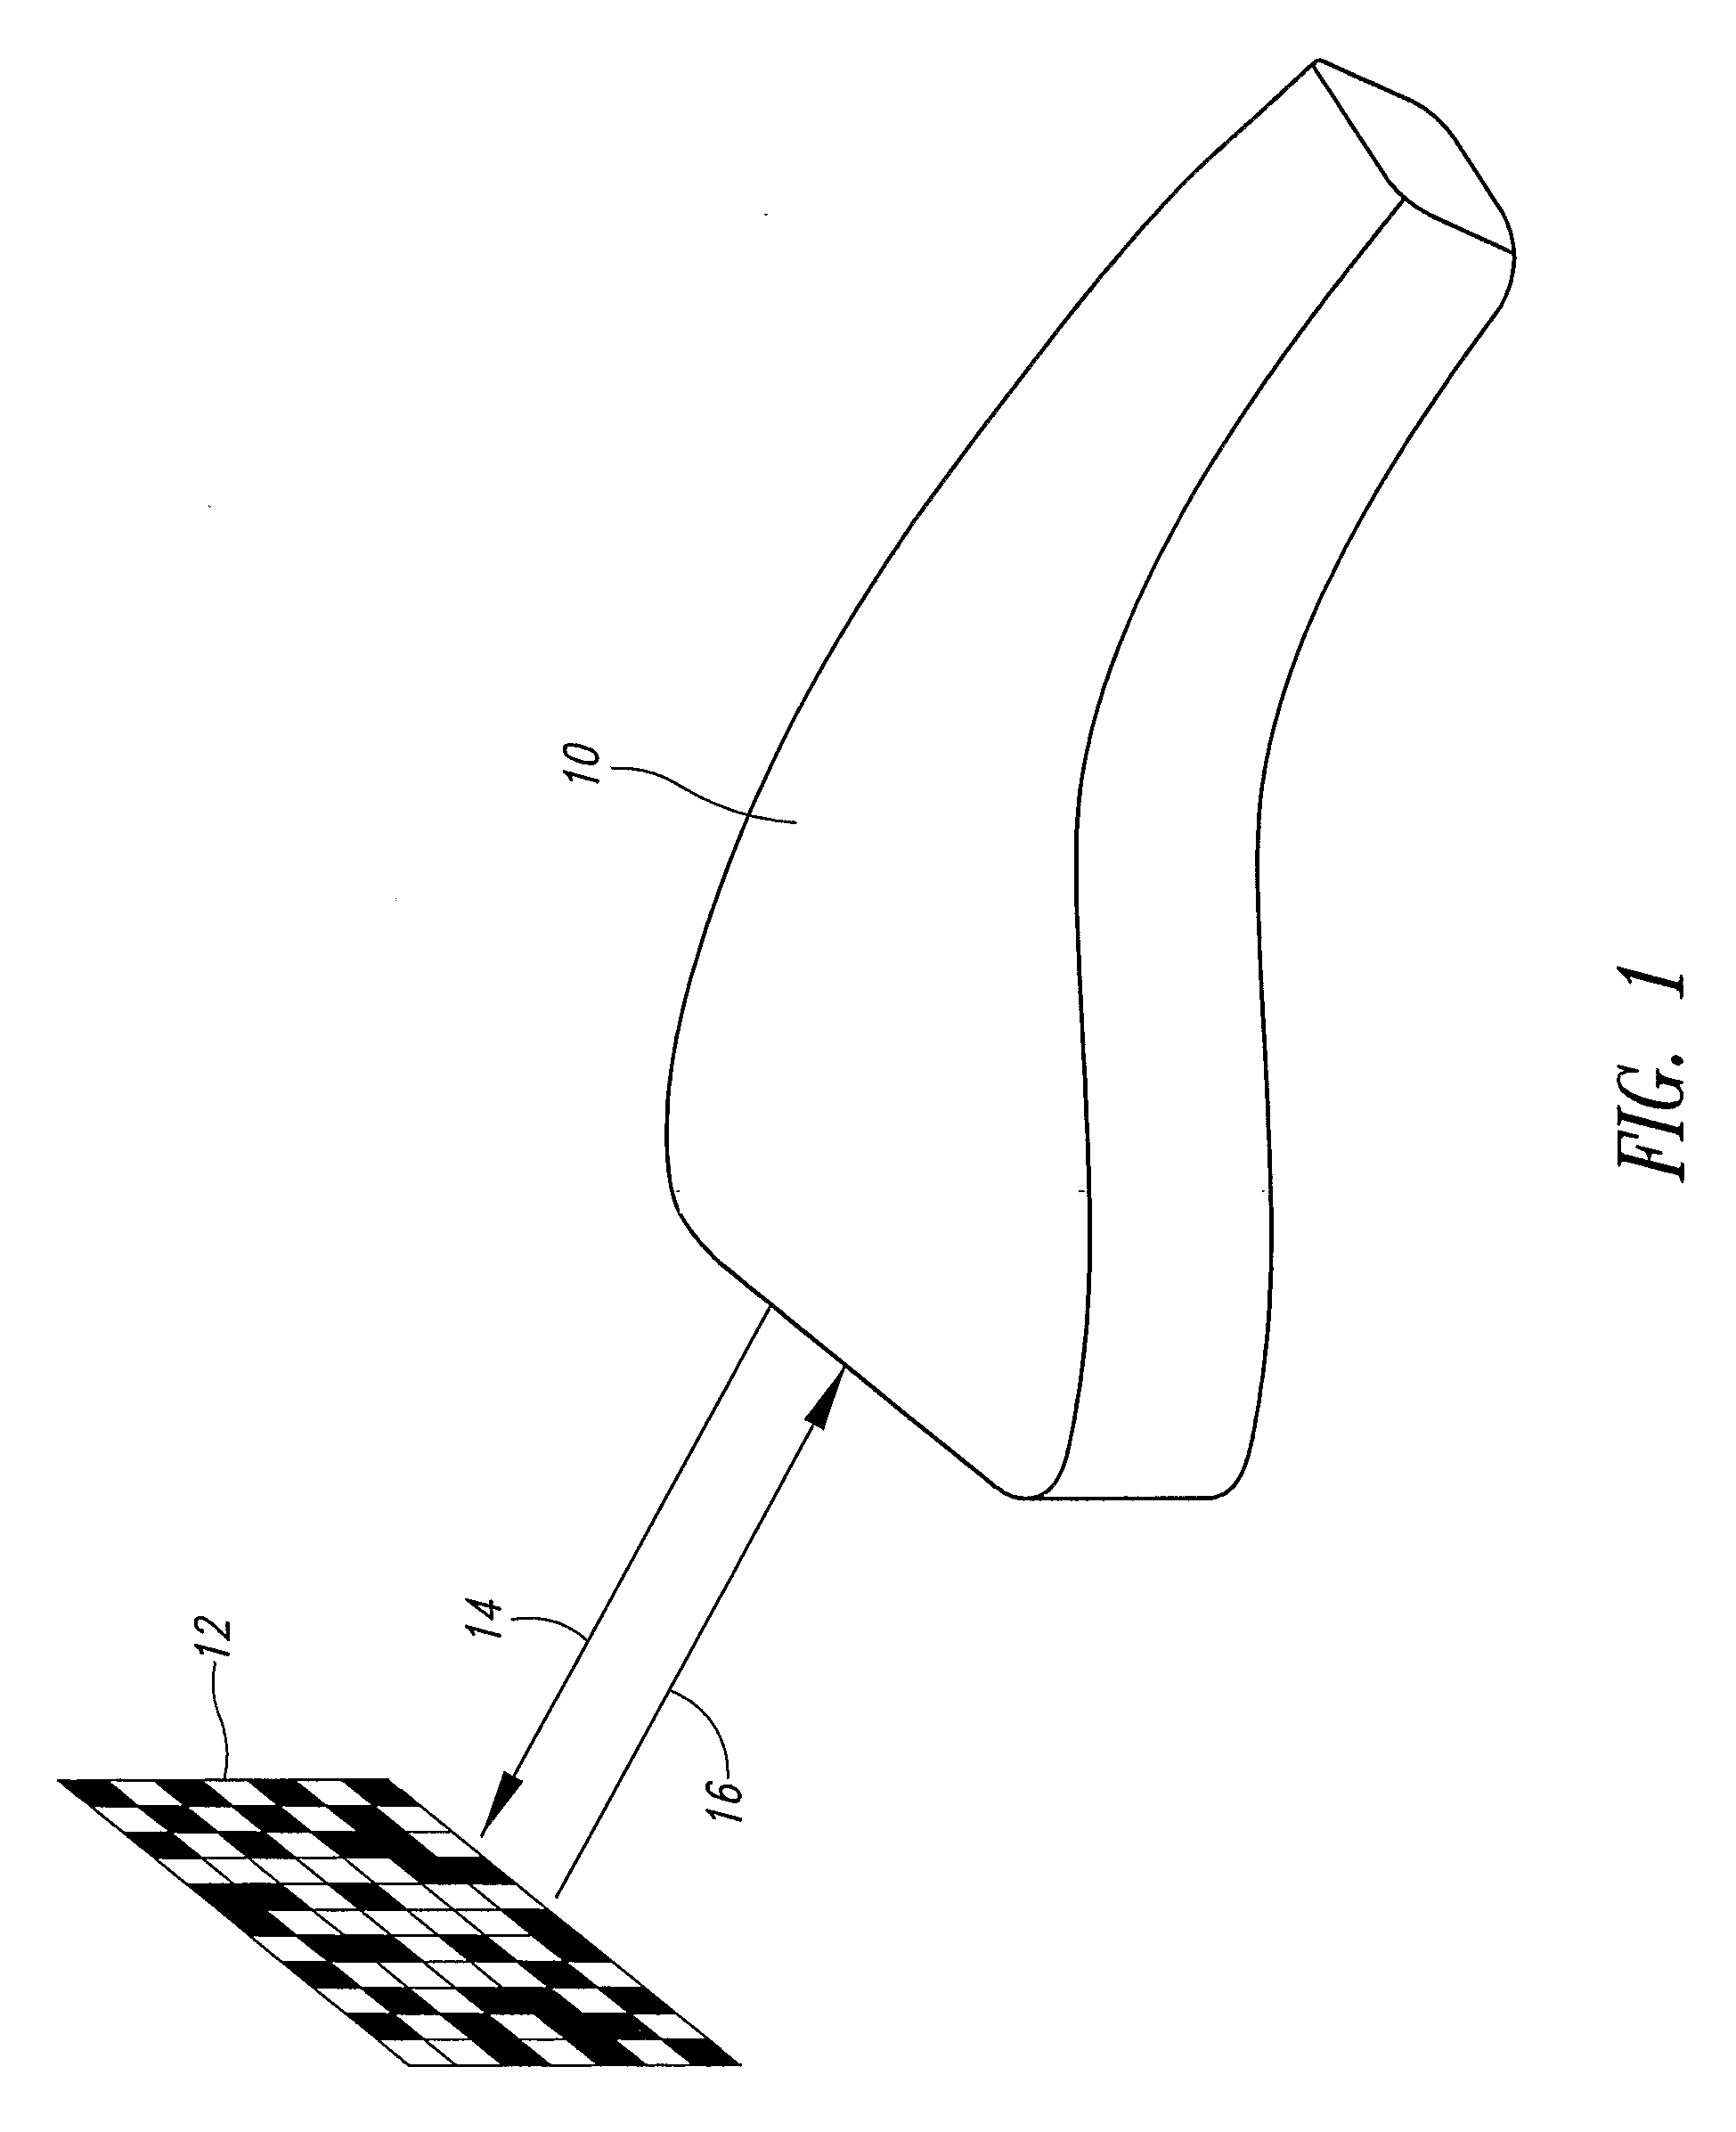 Machine-readable symbol reader and method employing an ultracompact light concentrator with adaptive field of view